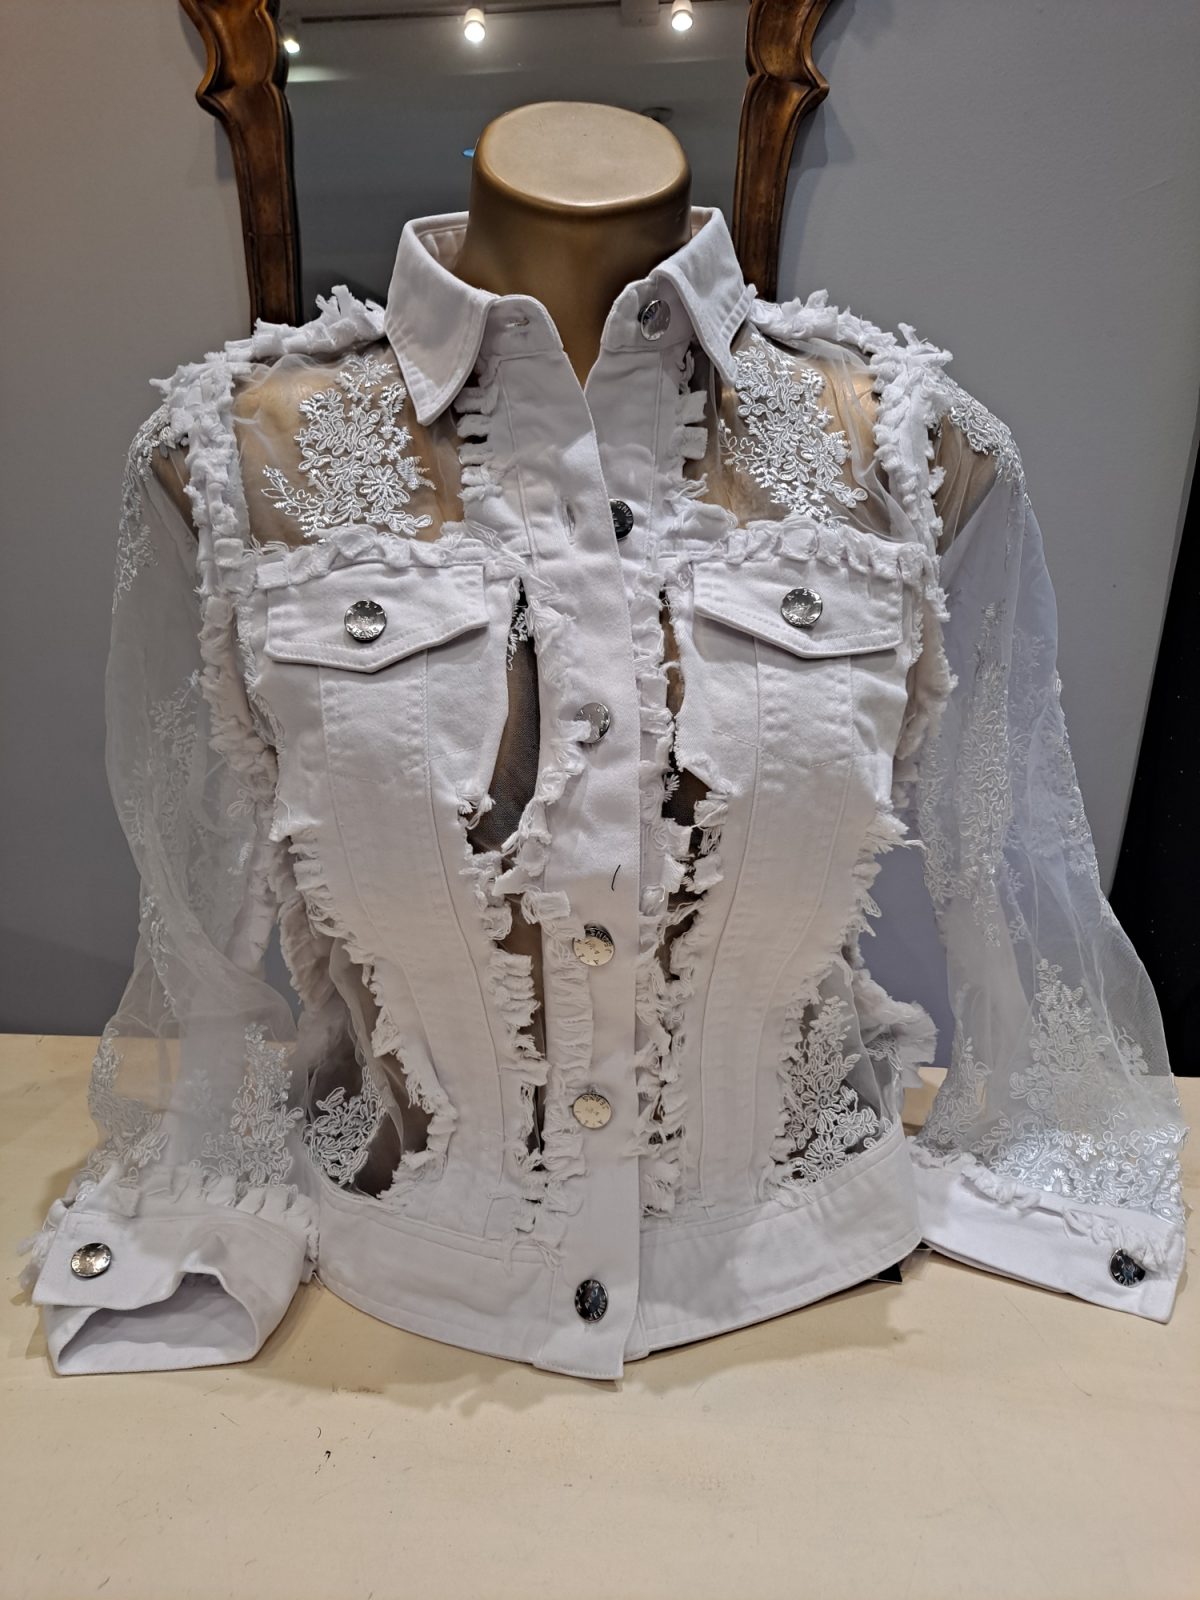 AZI Z11225 White Denim Floral Lace Short Jacket | Ooh Ooh Shoes women's clothing and shoe boutique located in Naples and Mashpee